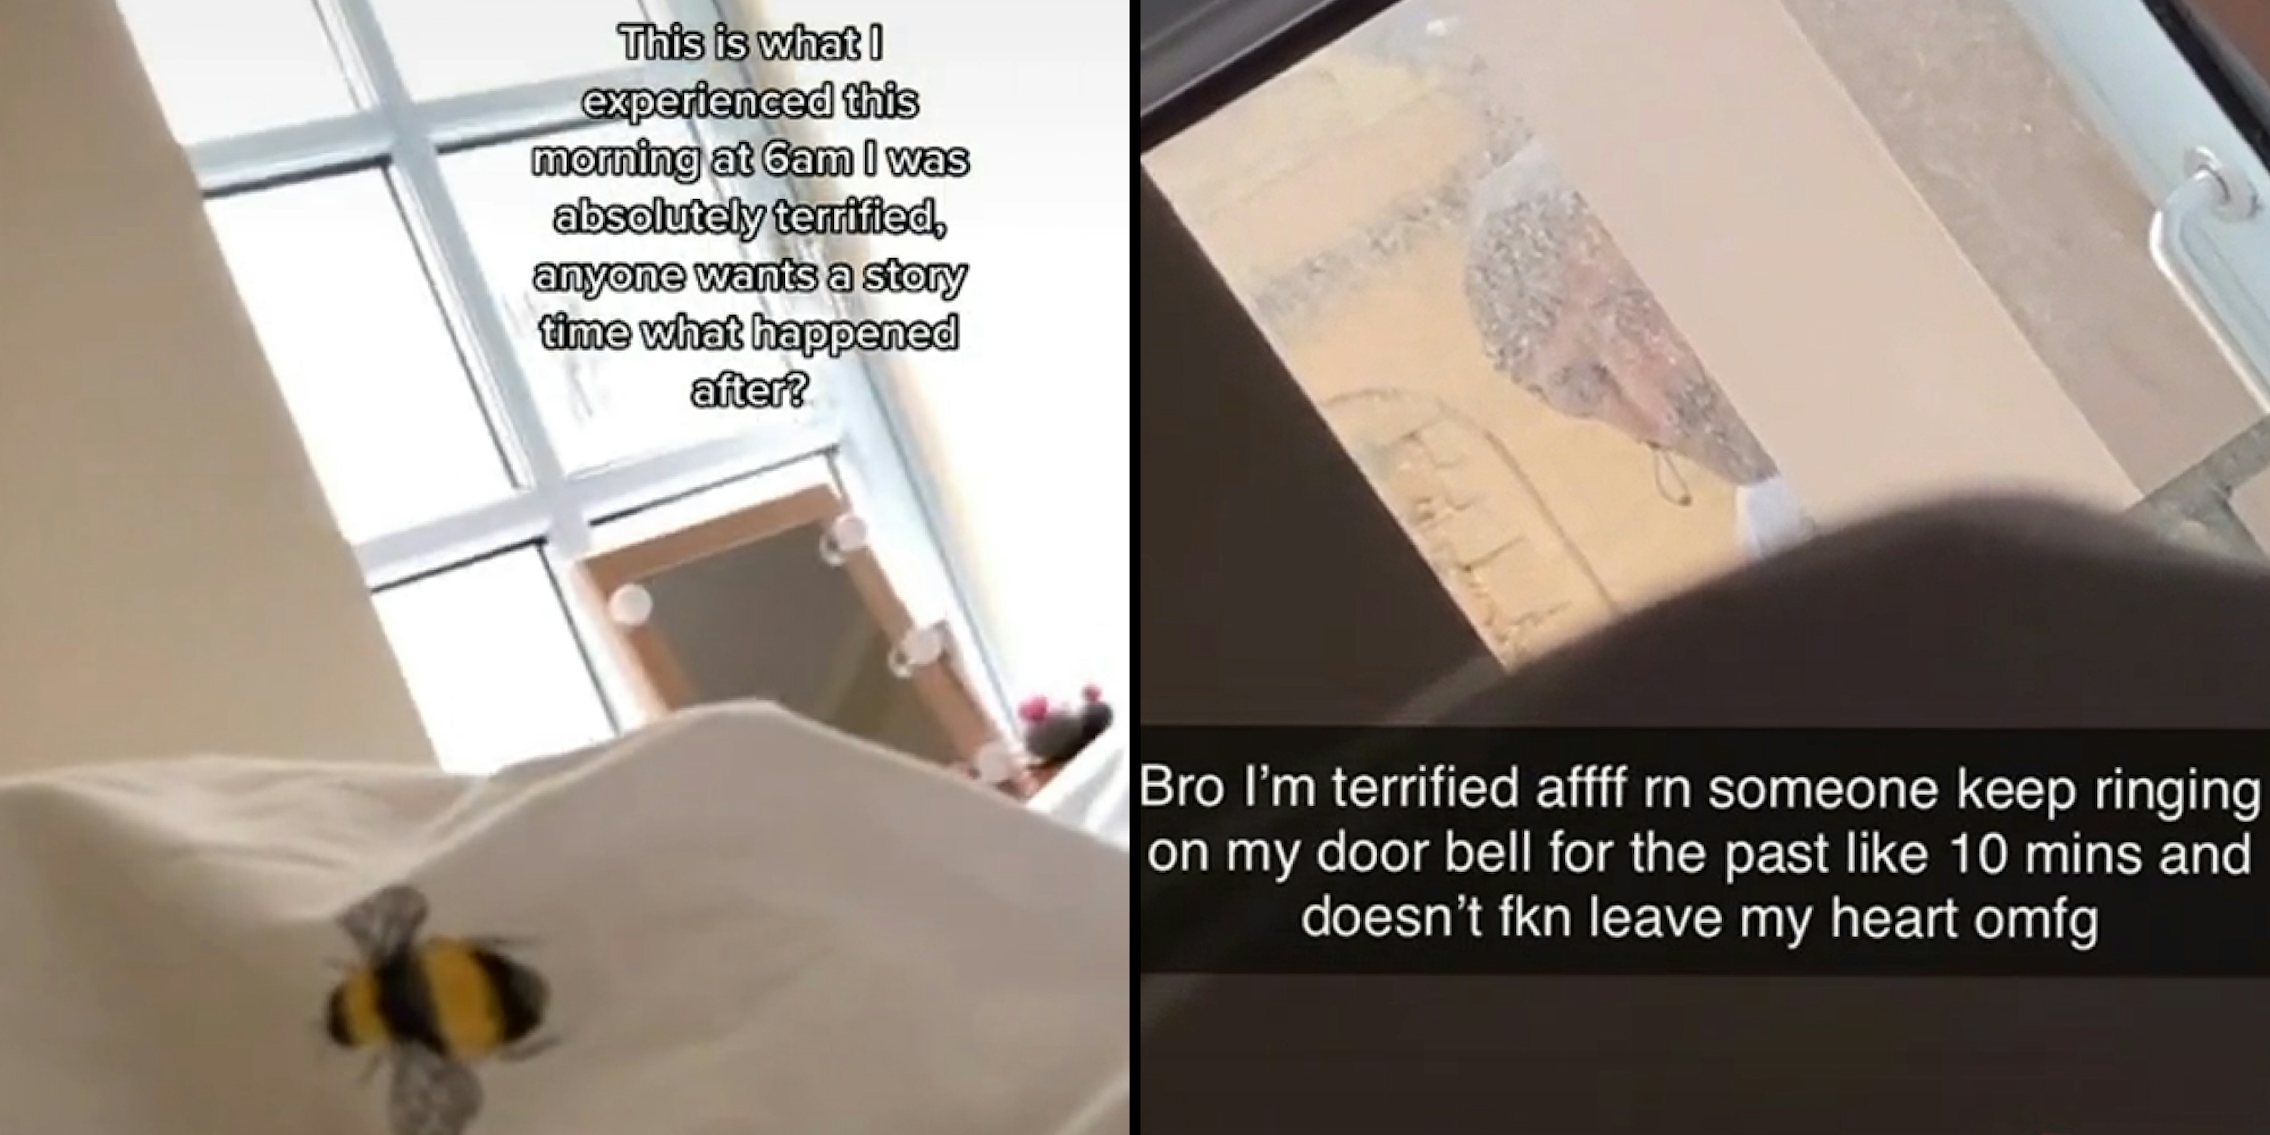 Blanket with bee in room window behind caption 'This is what I experienced this morning at 6am I was absolutely terrified. anyone wants a story time what happened after?' (l) Man peeking in window caption 'Bro I'm terrified afff rn someone keep ringing on my door bell for the past like 10 mins and doesn't fkn leave my heart omfg' (r)